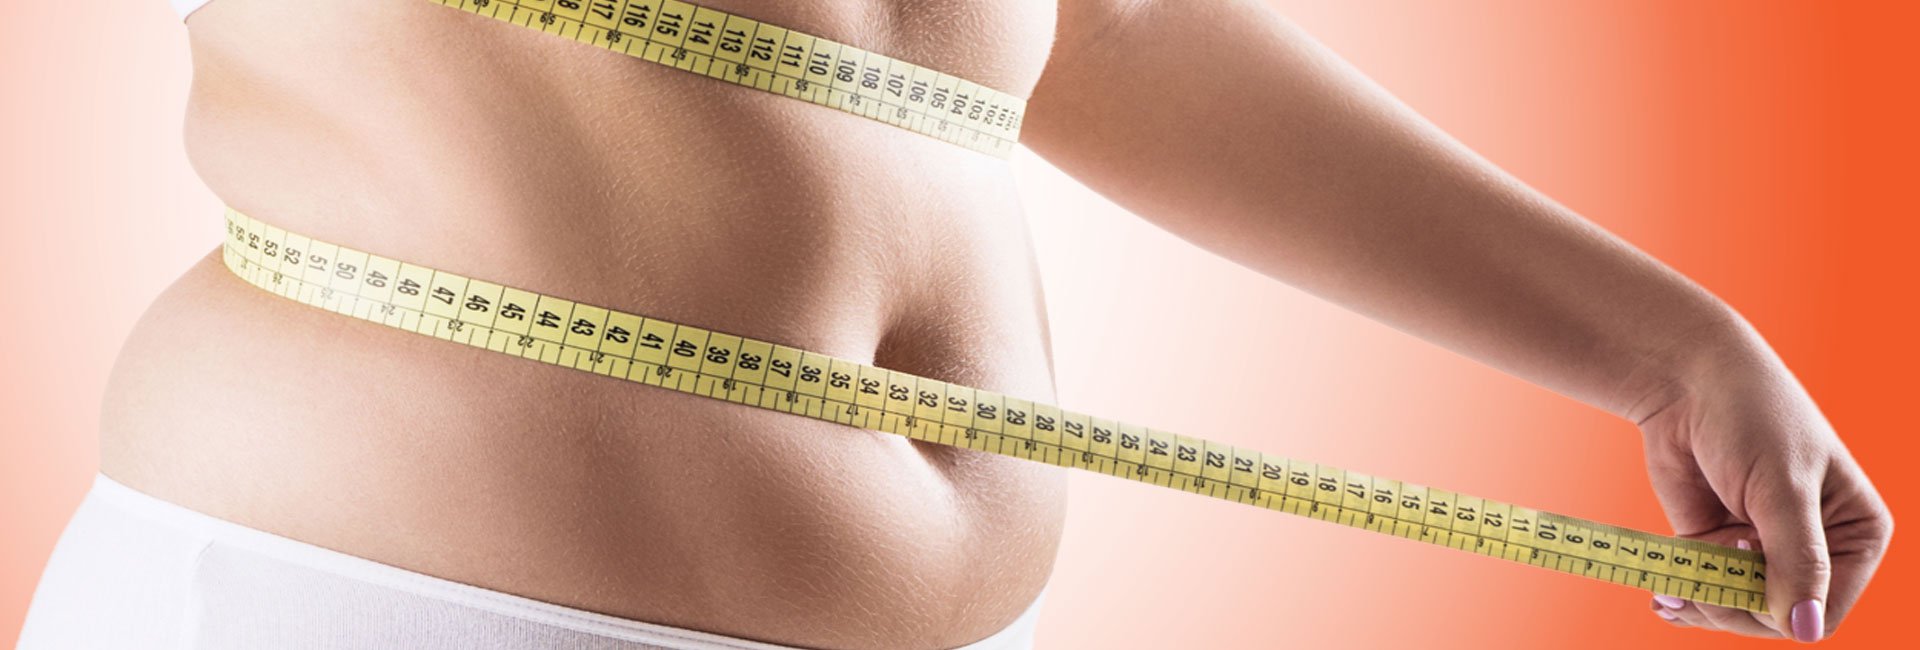 New Image International:Are your hormones making you fat?